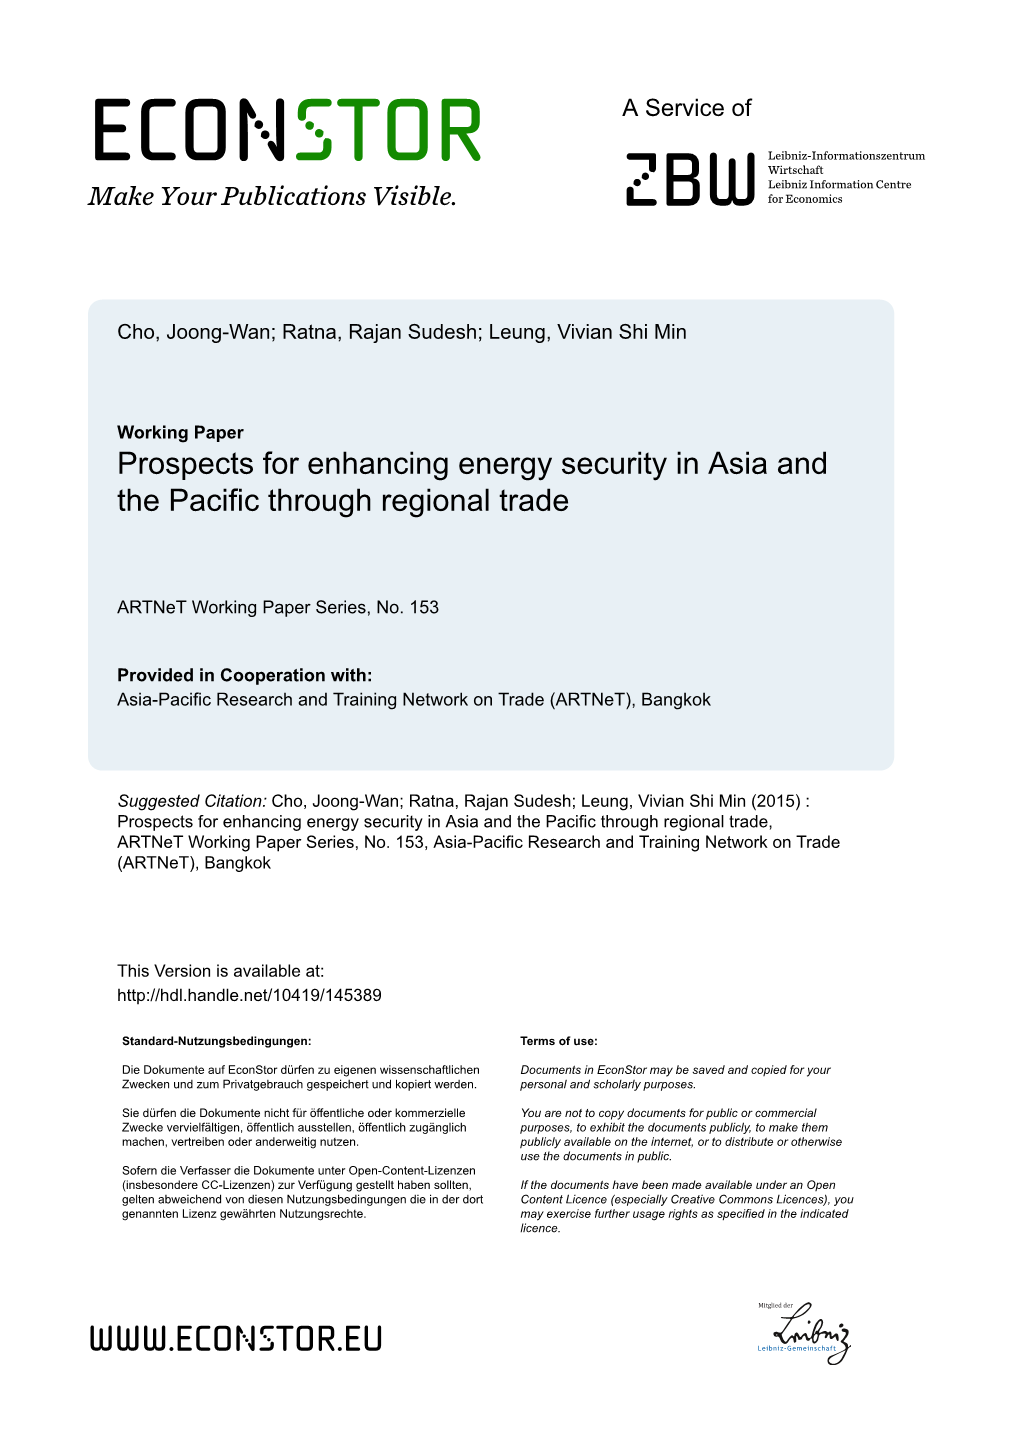 Prospects for Enhancing Energy Security in Asia and the Pacific Through Regional Trade